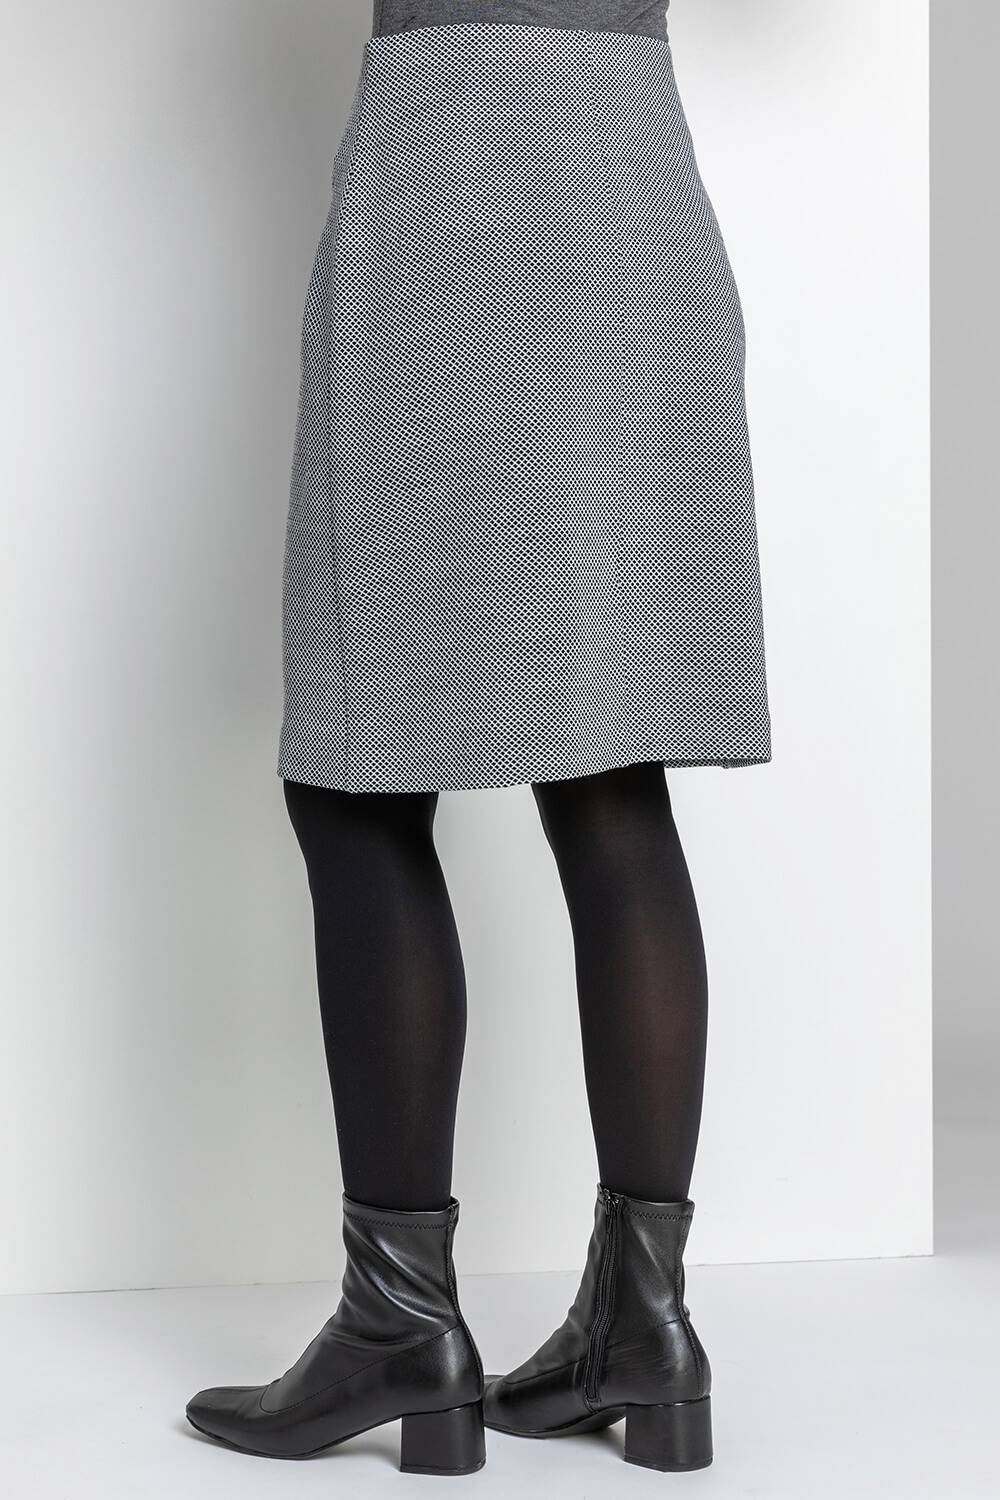 Black Two Tone Textured Skirt , Image 3 of 4